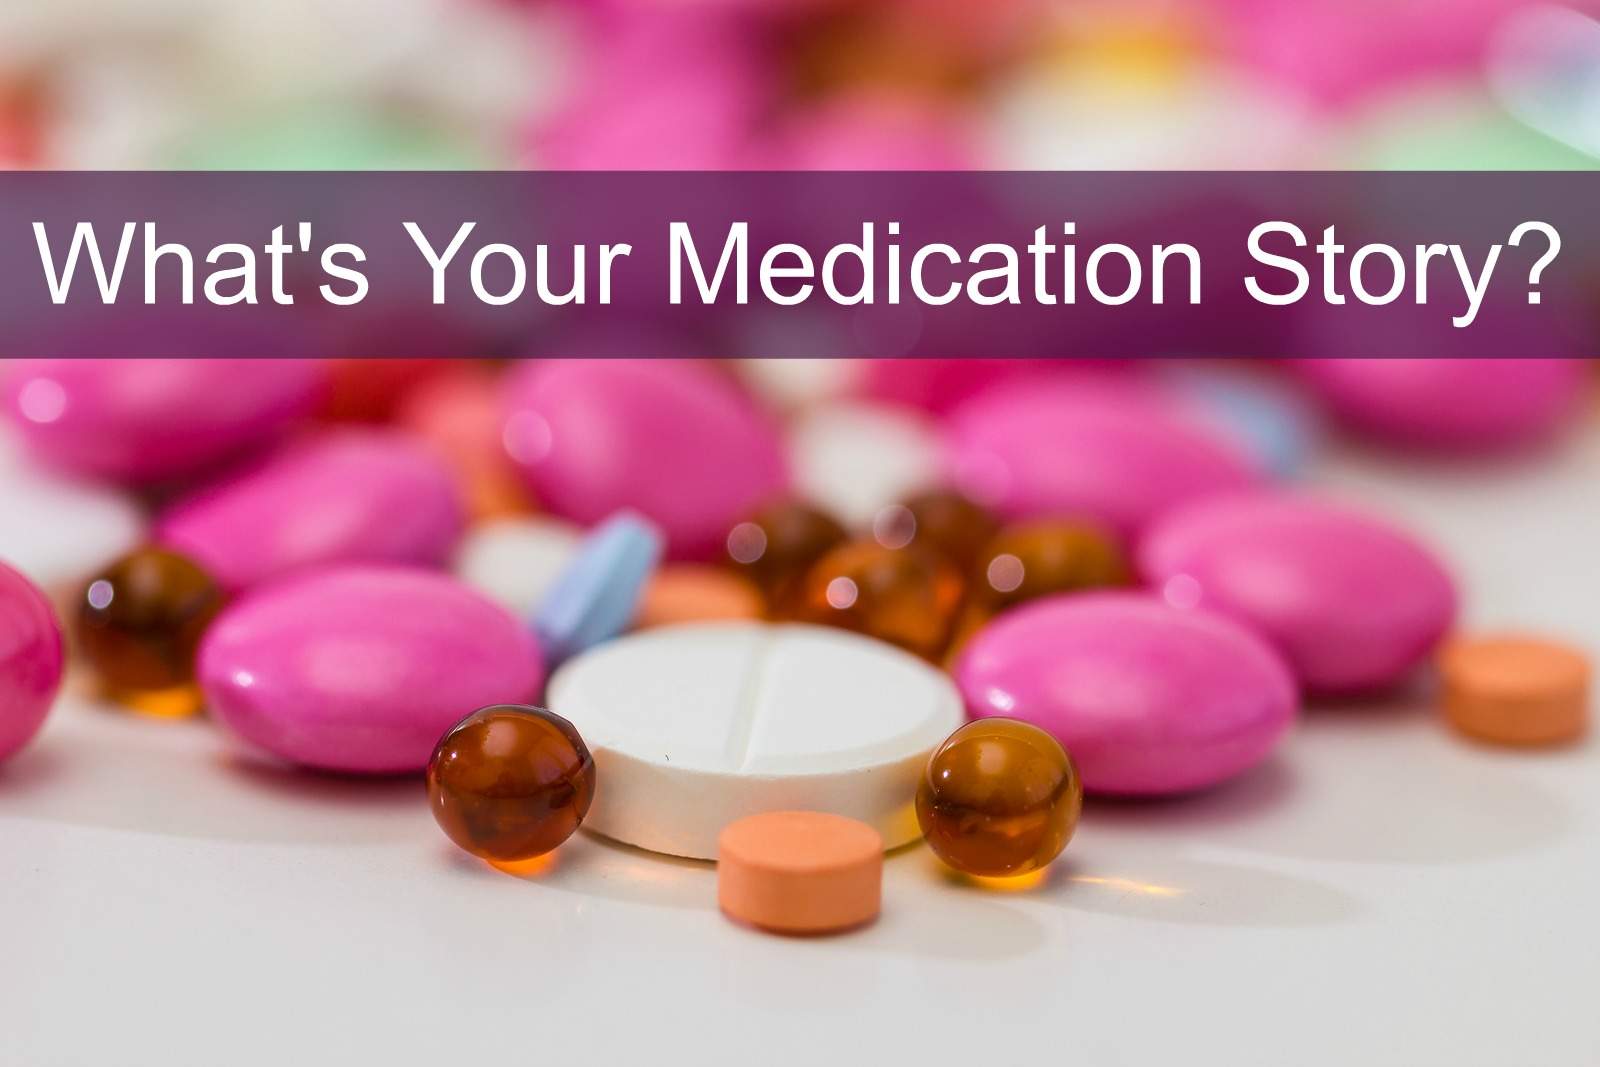 What Is Your Medication Story?